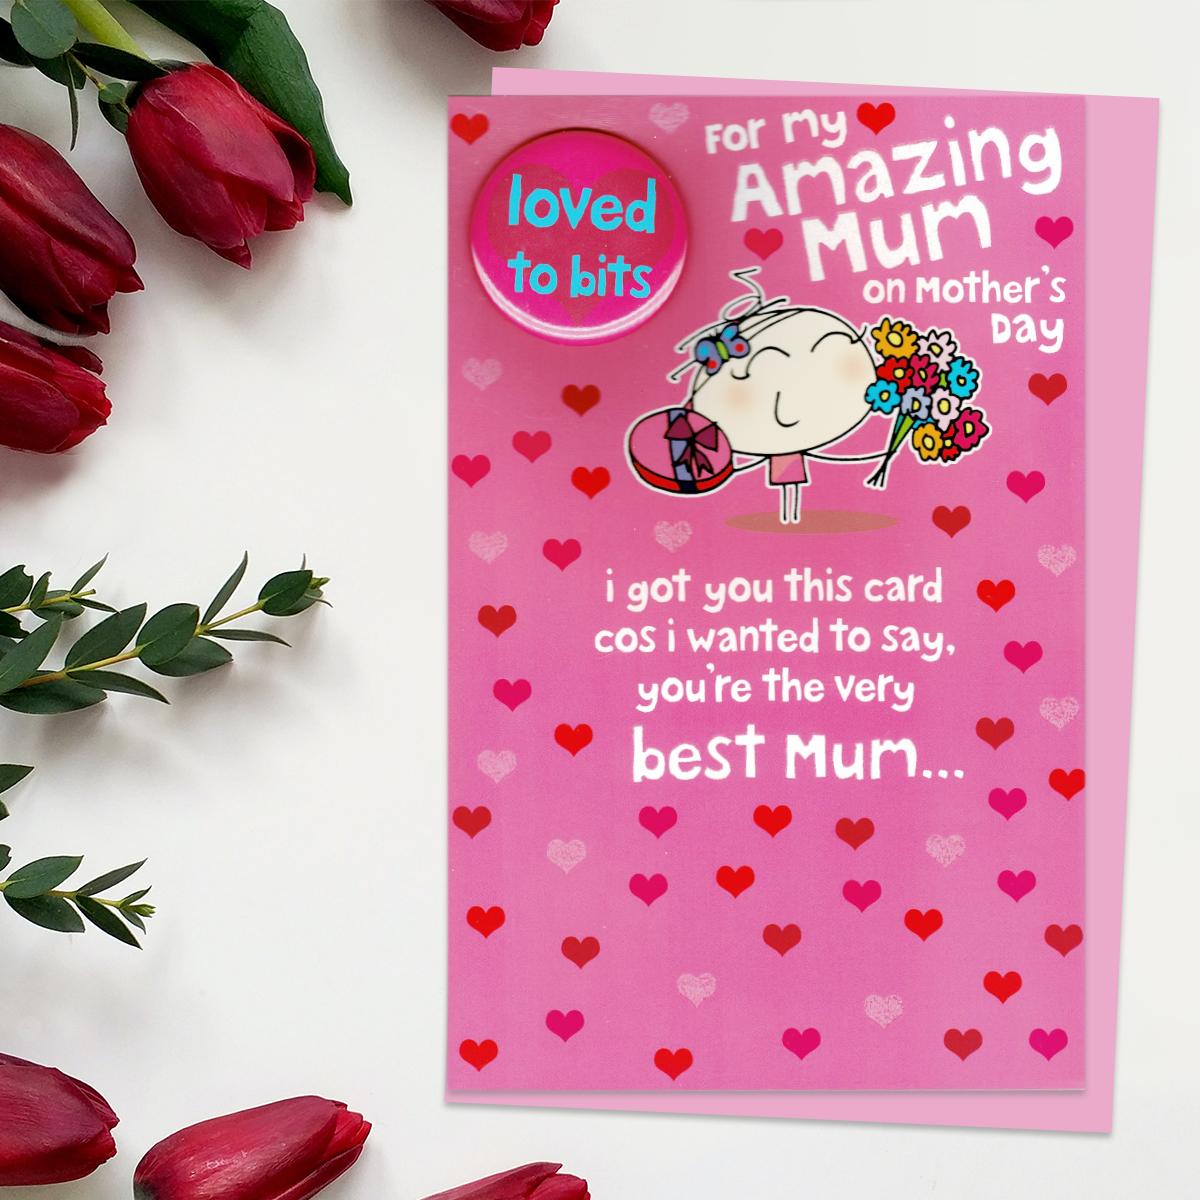 'For My Amazing Mum On Mother's Day' Card Featuring A Cartoon Girl With Chocolates And Flowers. With 'Loved To Bits' Badge Attached. Complete With Pink Envelope